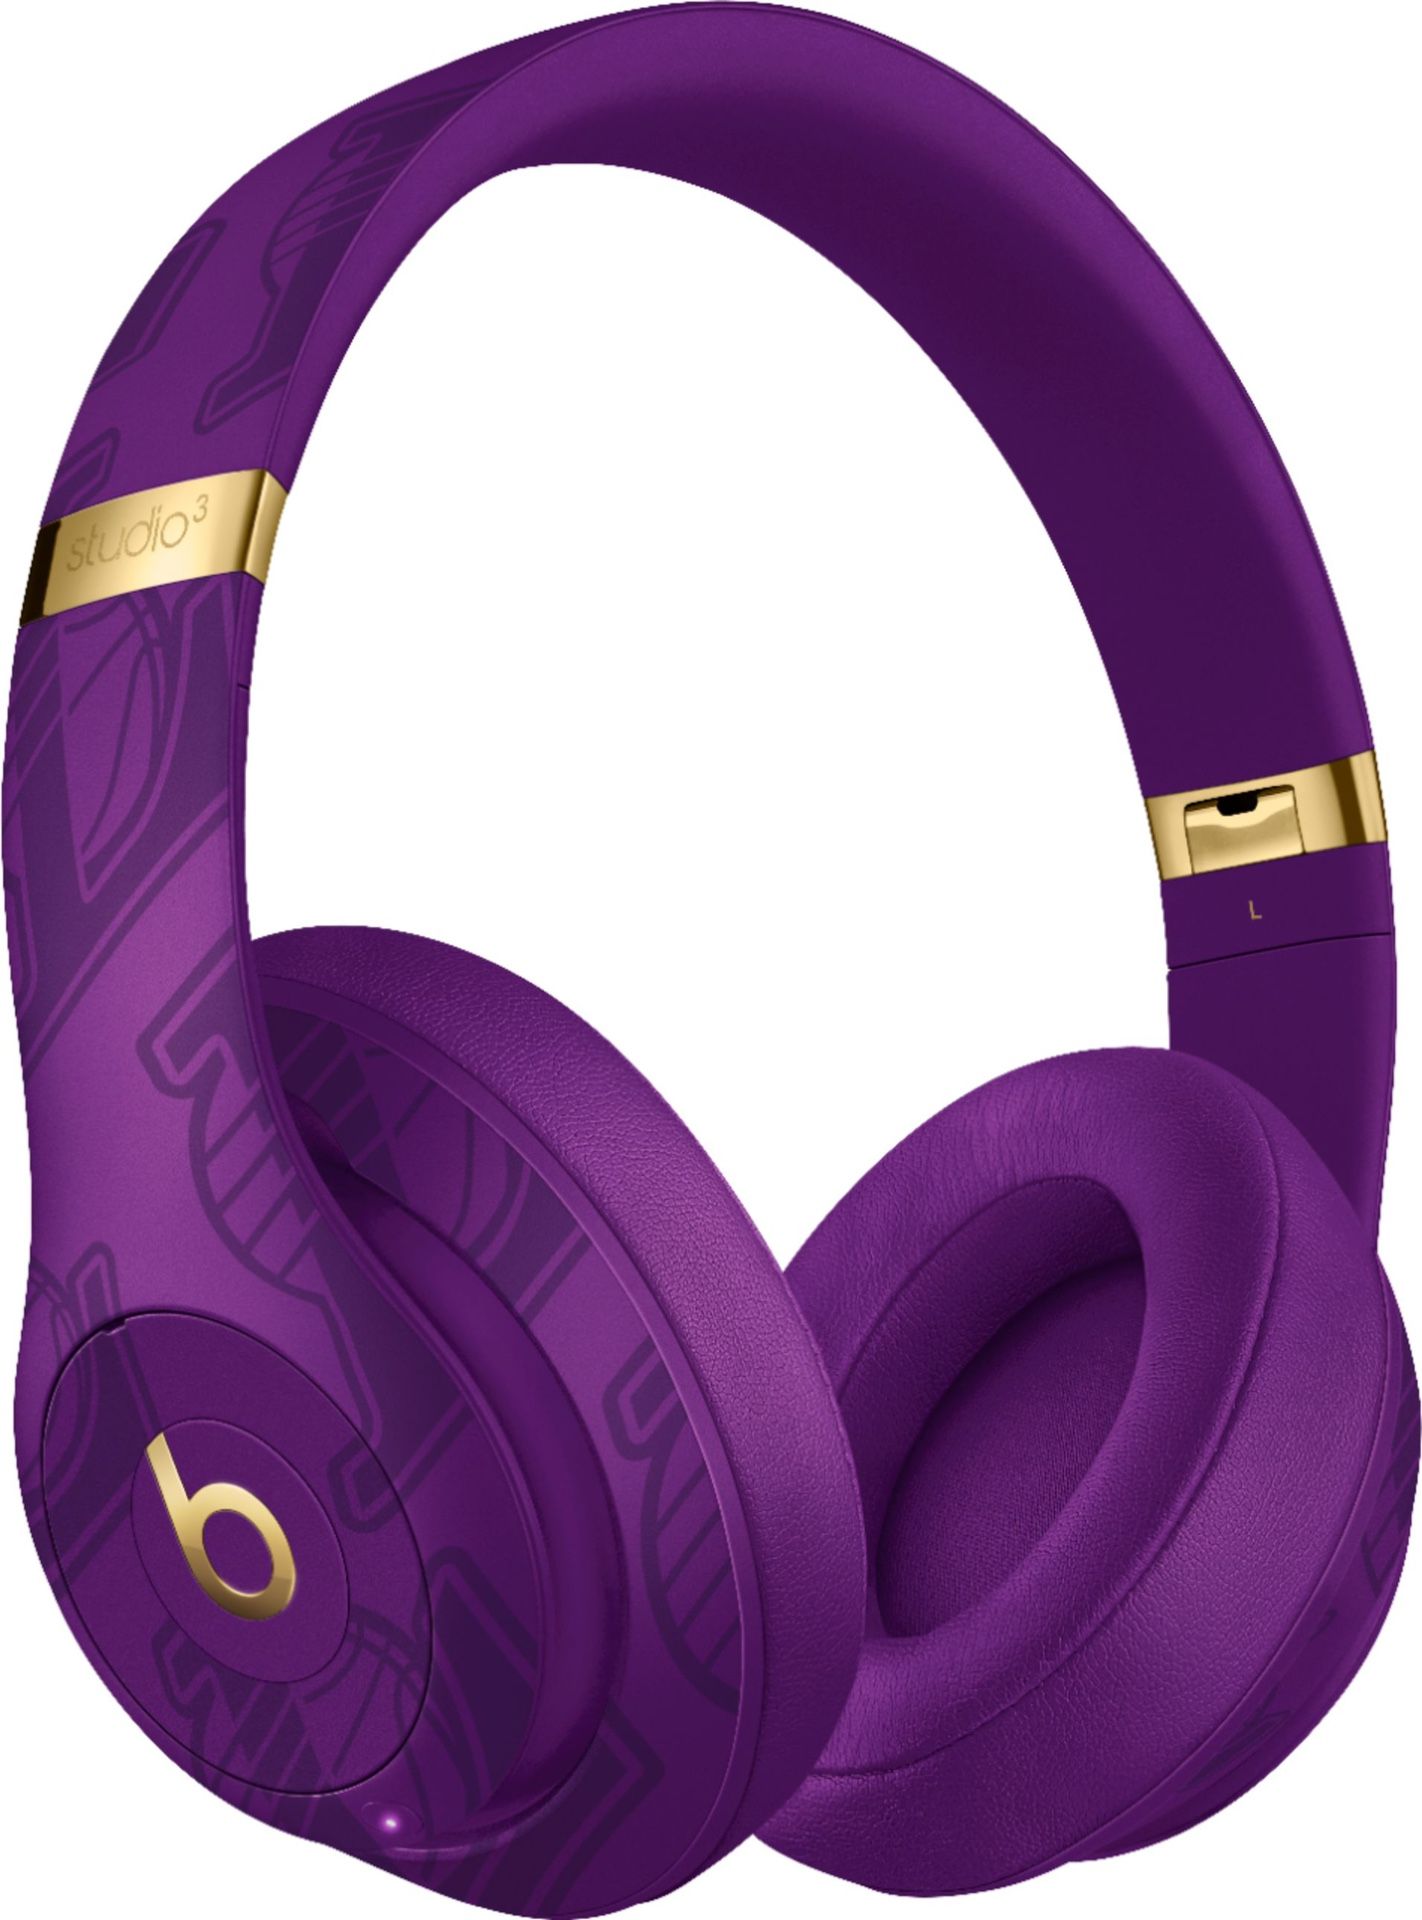 Brand new factory sealed beats studio three wireless Limited edition lakers